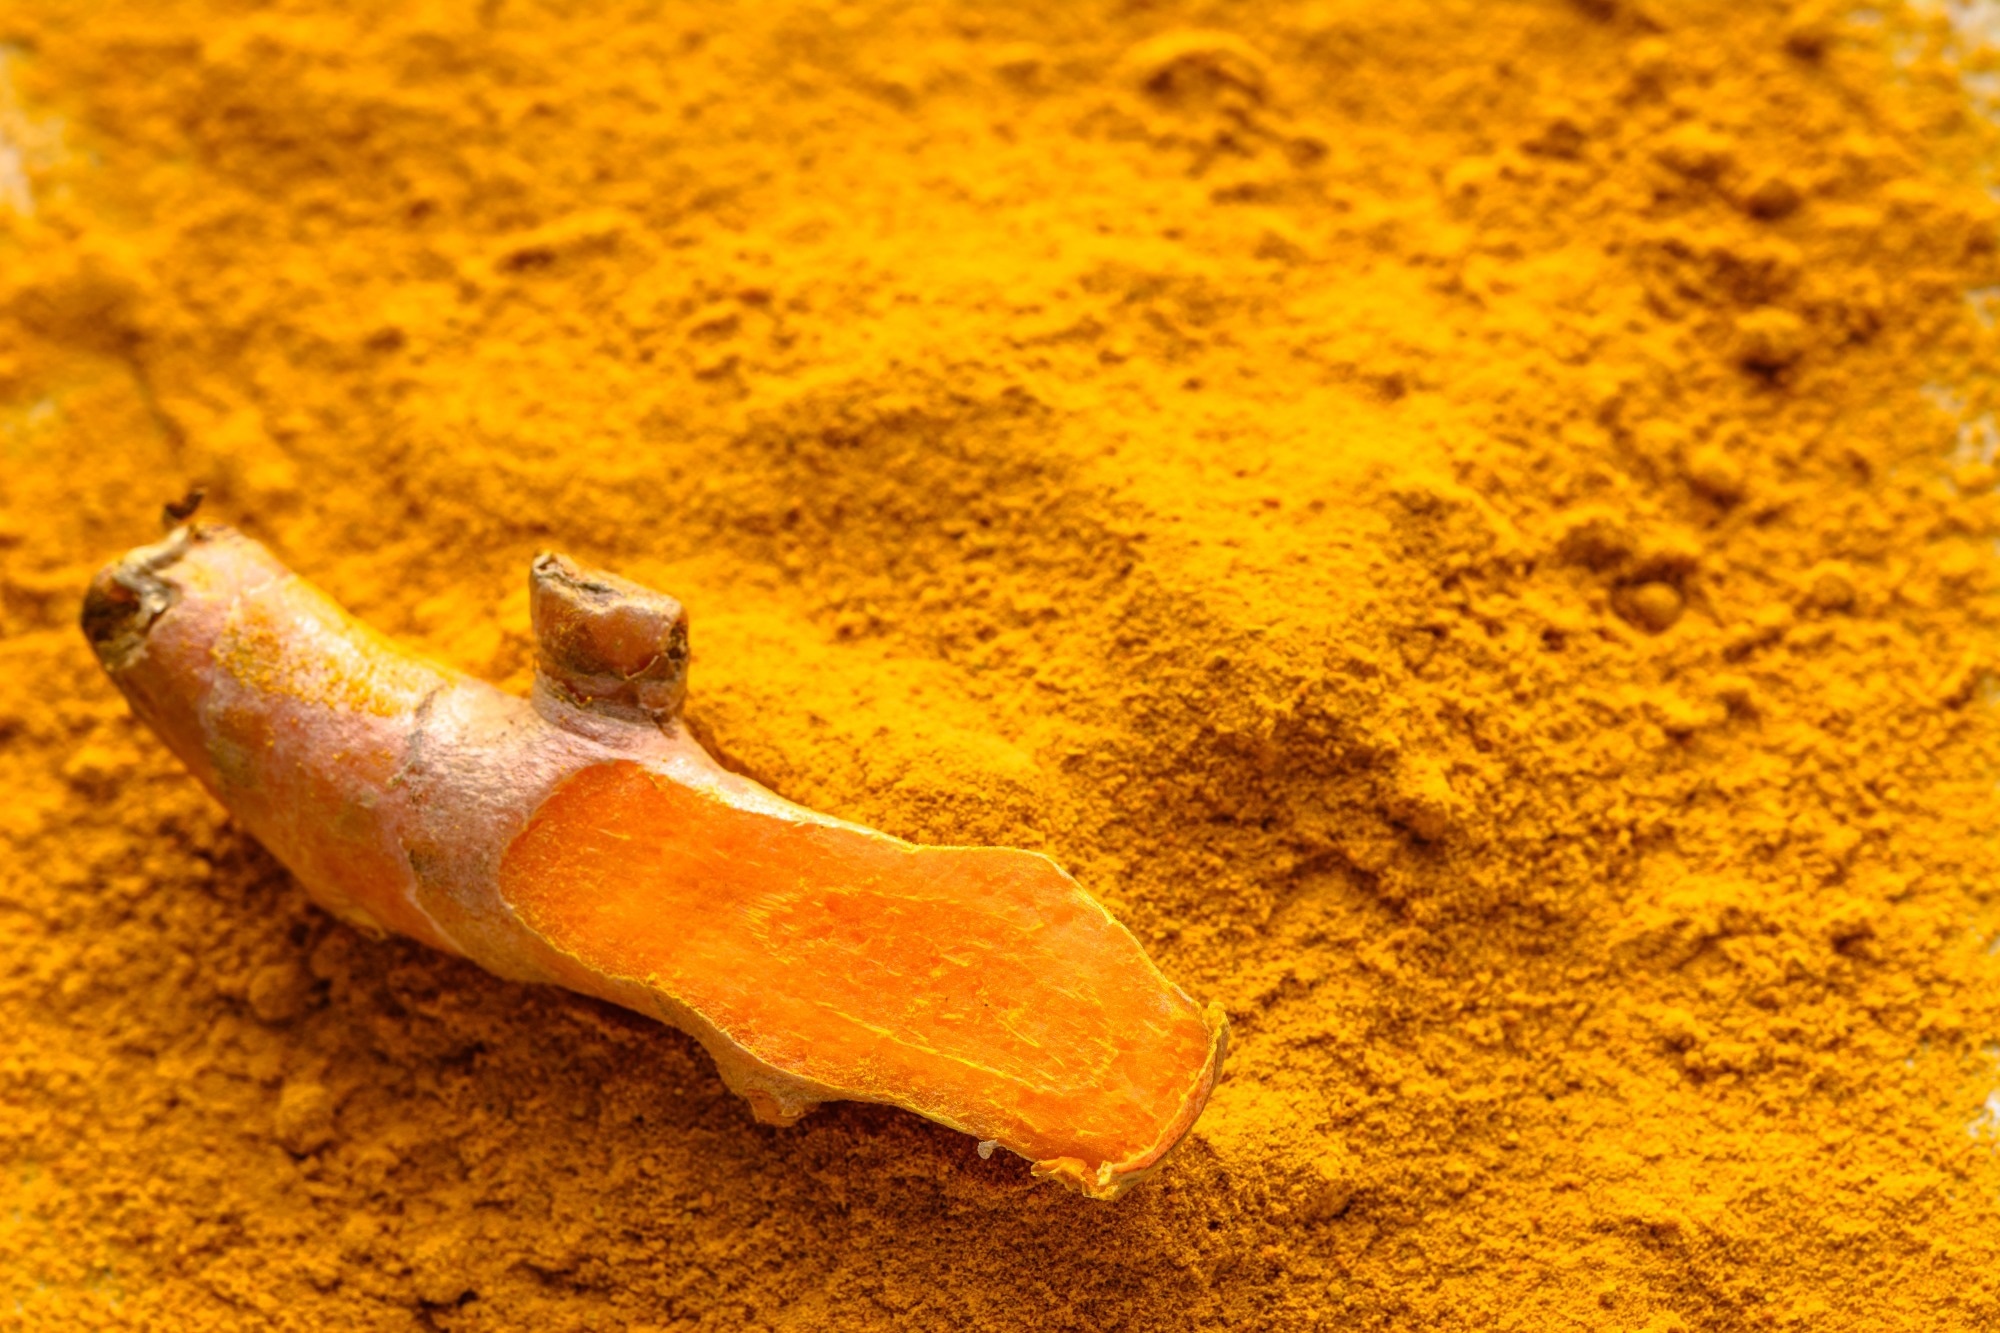 Curcumin spray shows promise in fighting SARS-CoV-2 and flu viruses